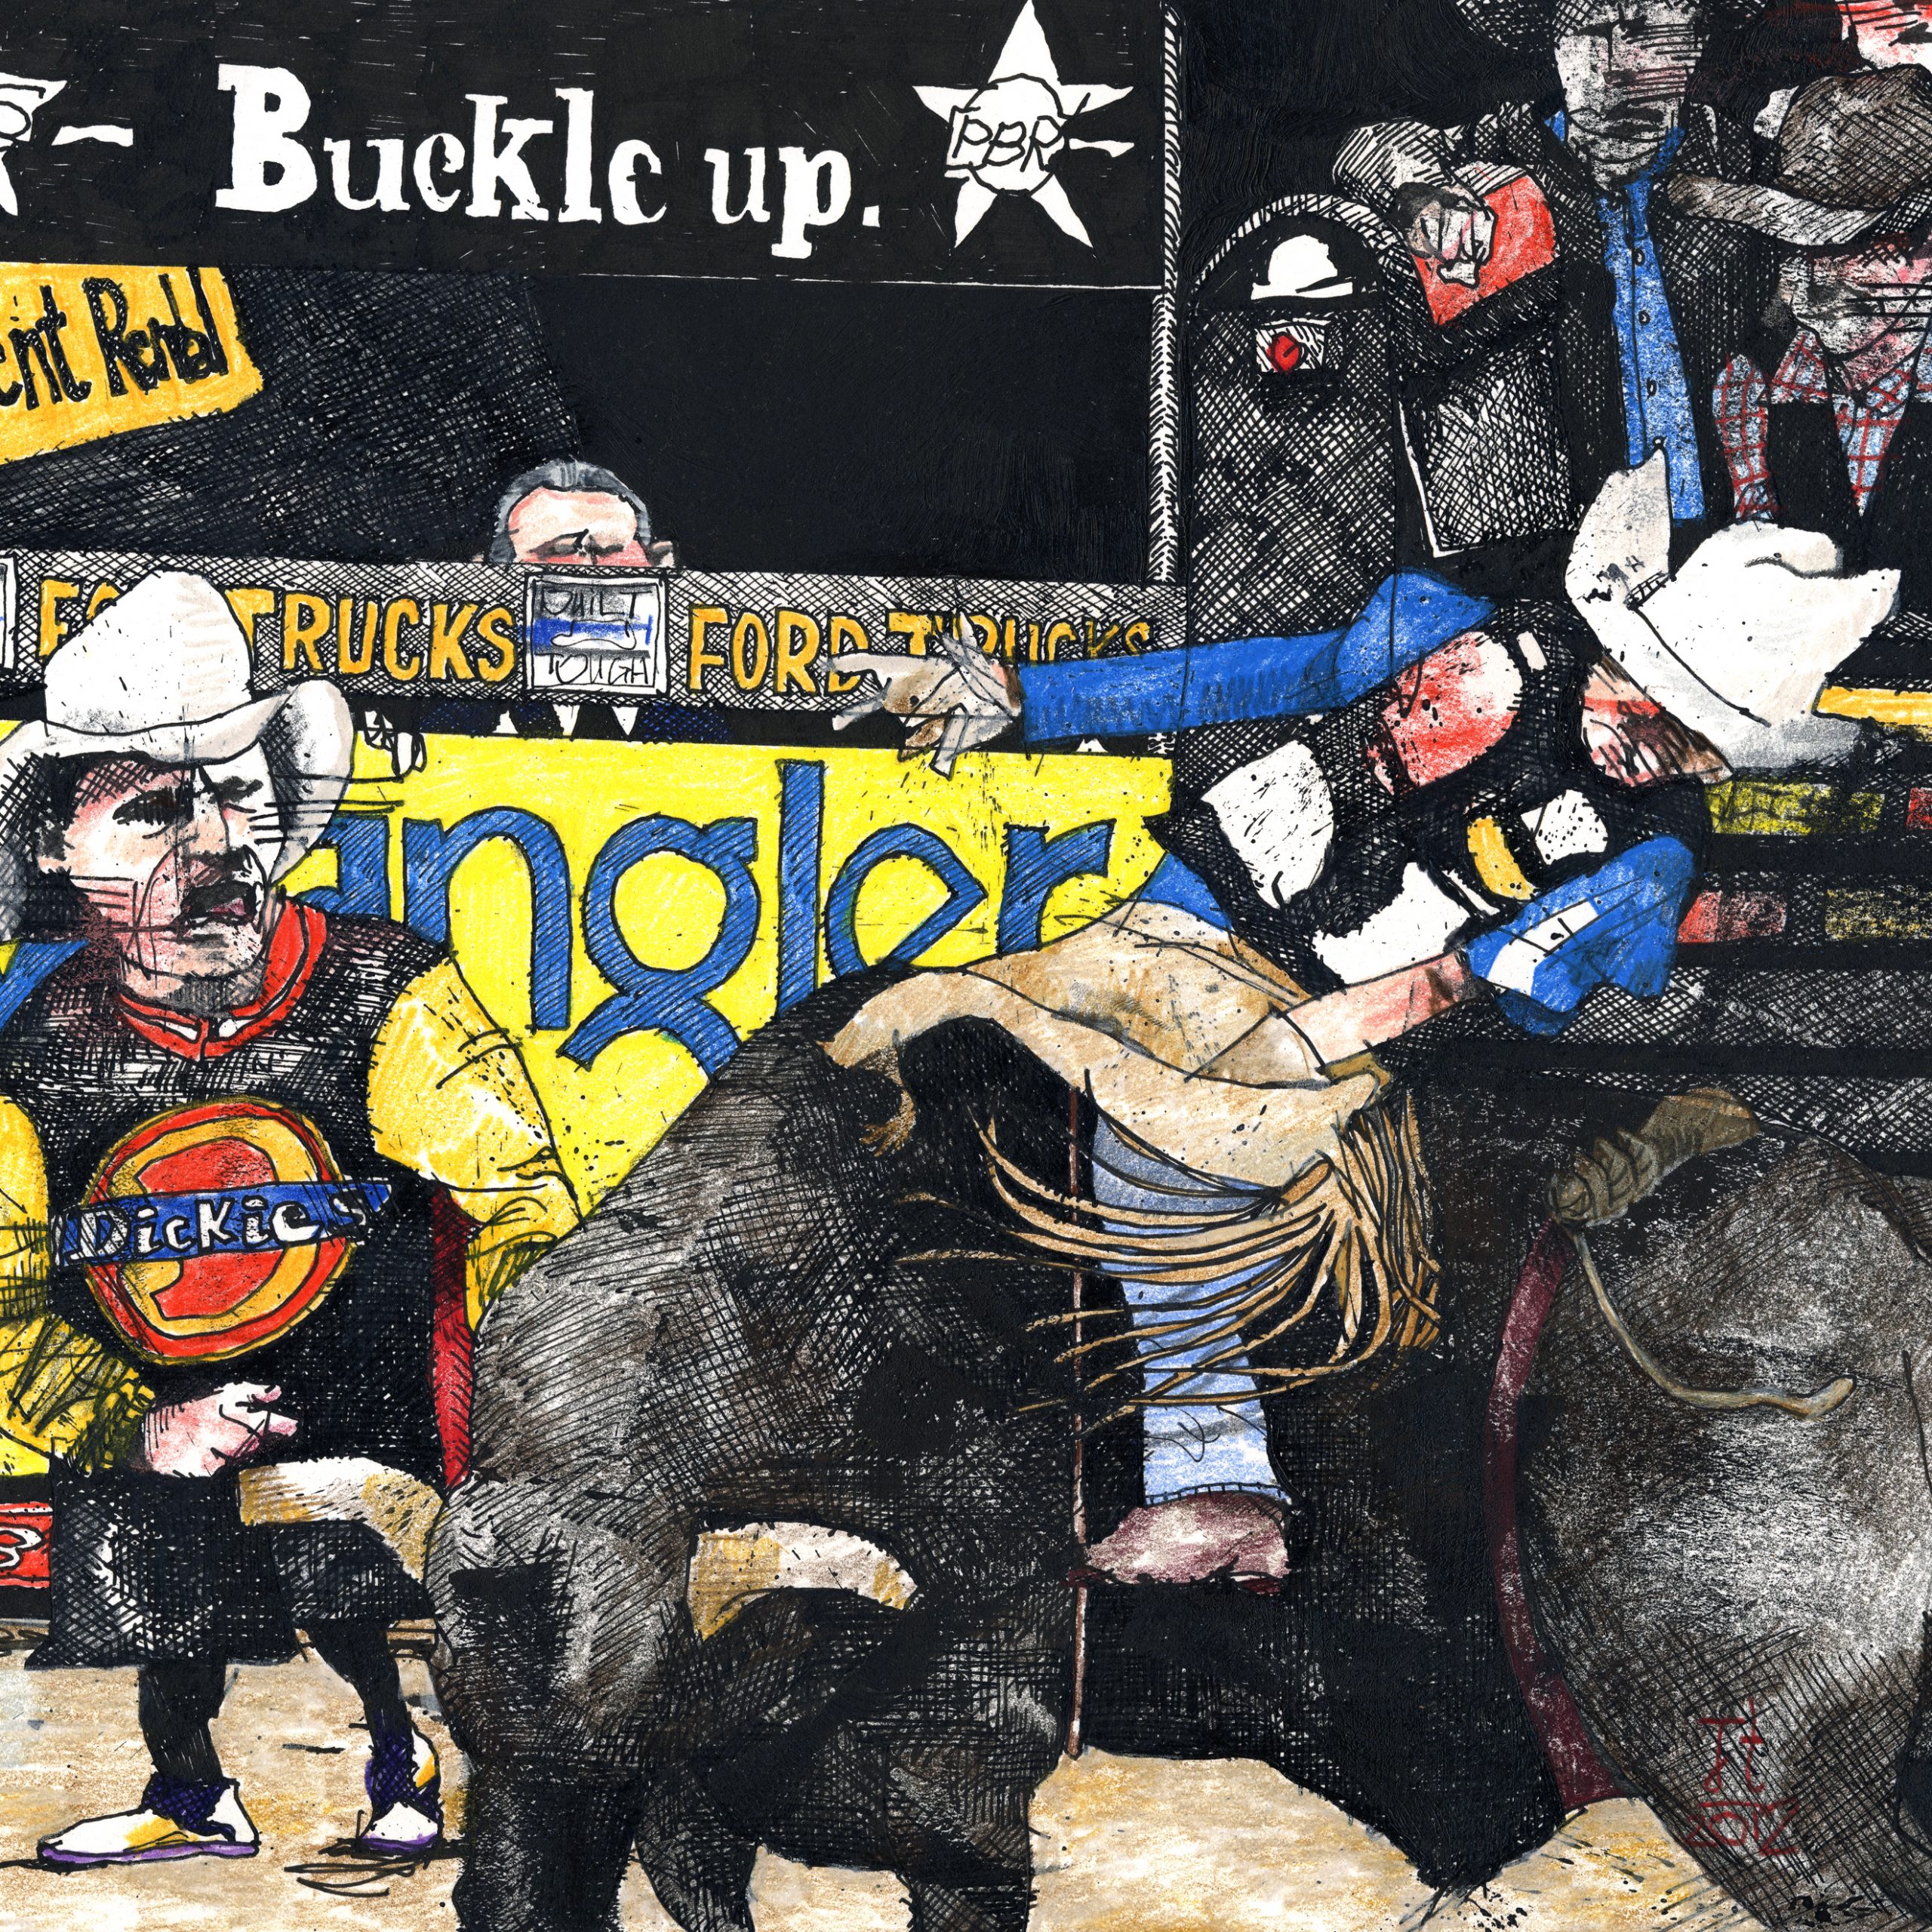 PBR MSG 4 Cowboys and Indians Magazine